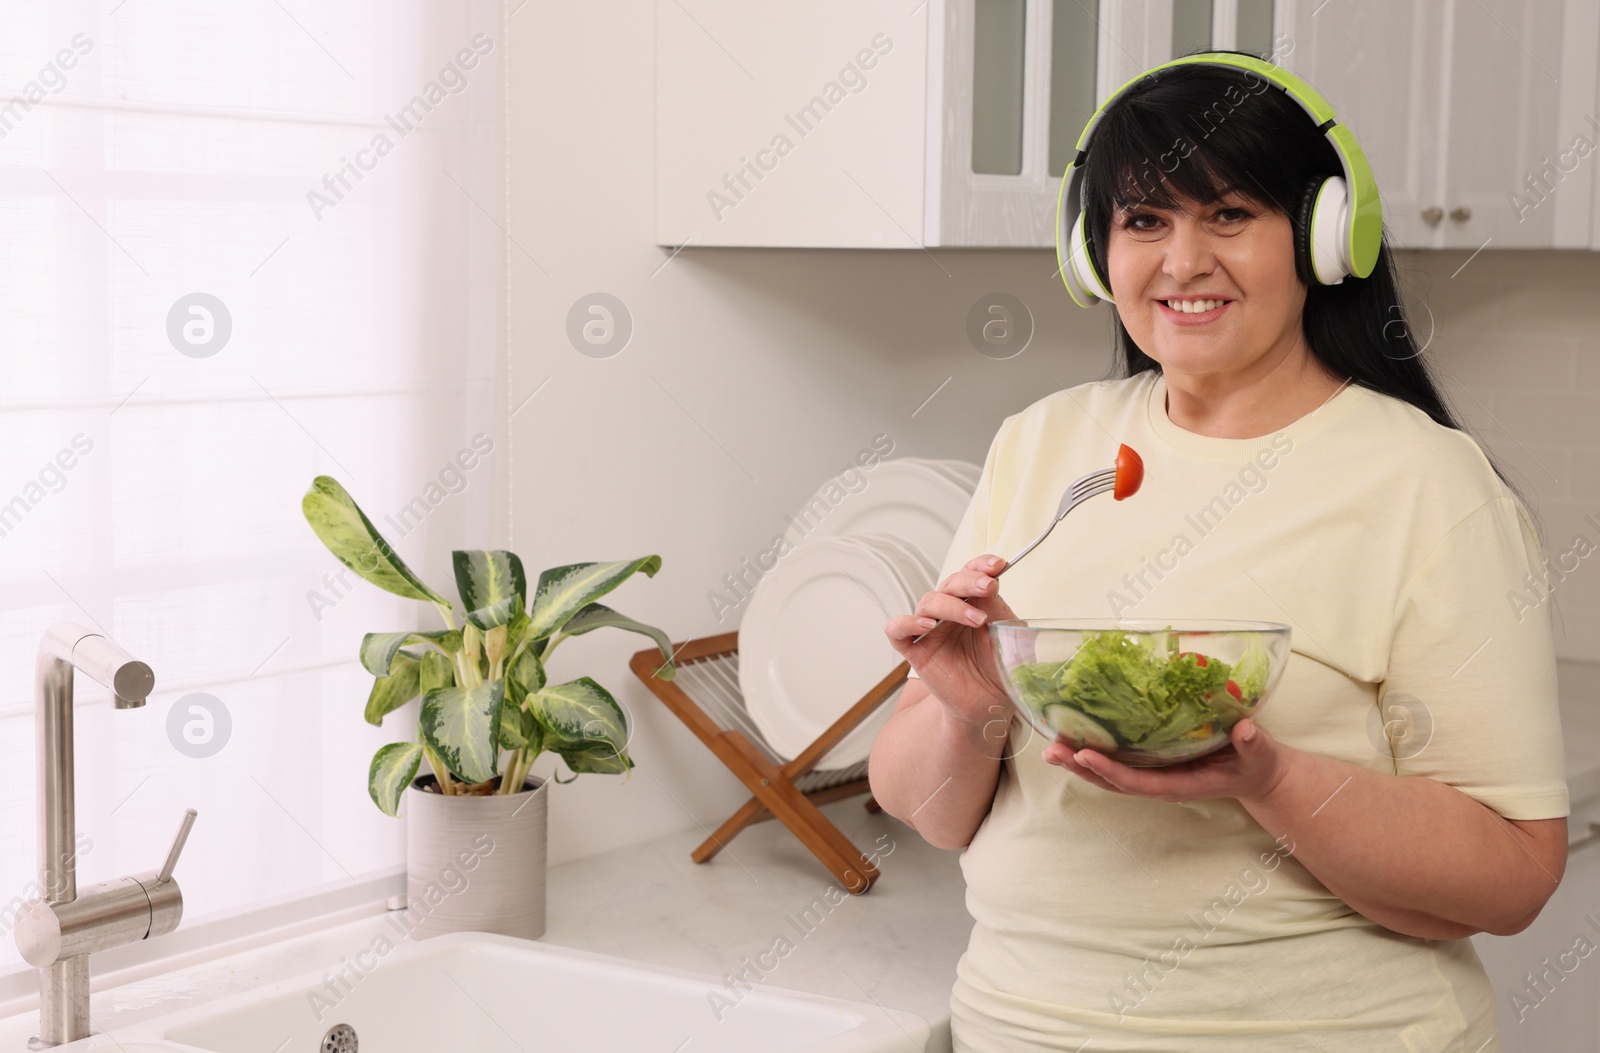 Photo of Happy overweight woman with headphones and bowl of salad in kitchen. Healthy diet